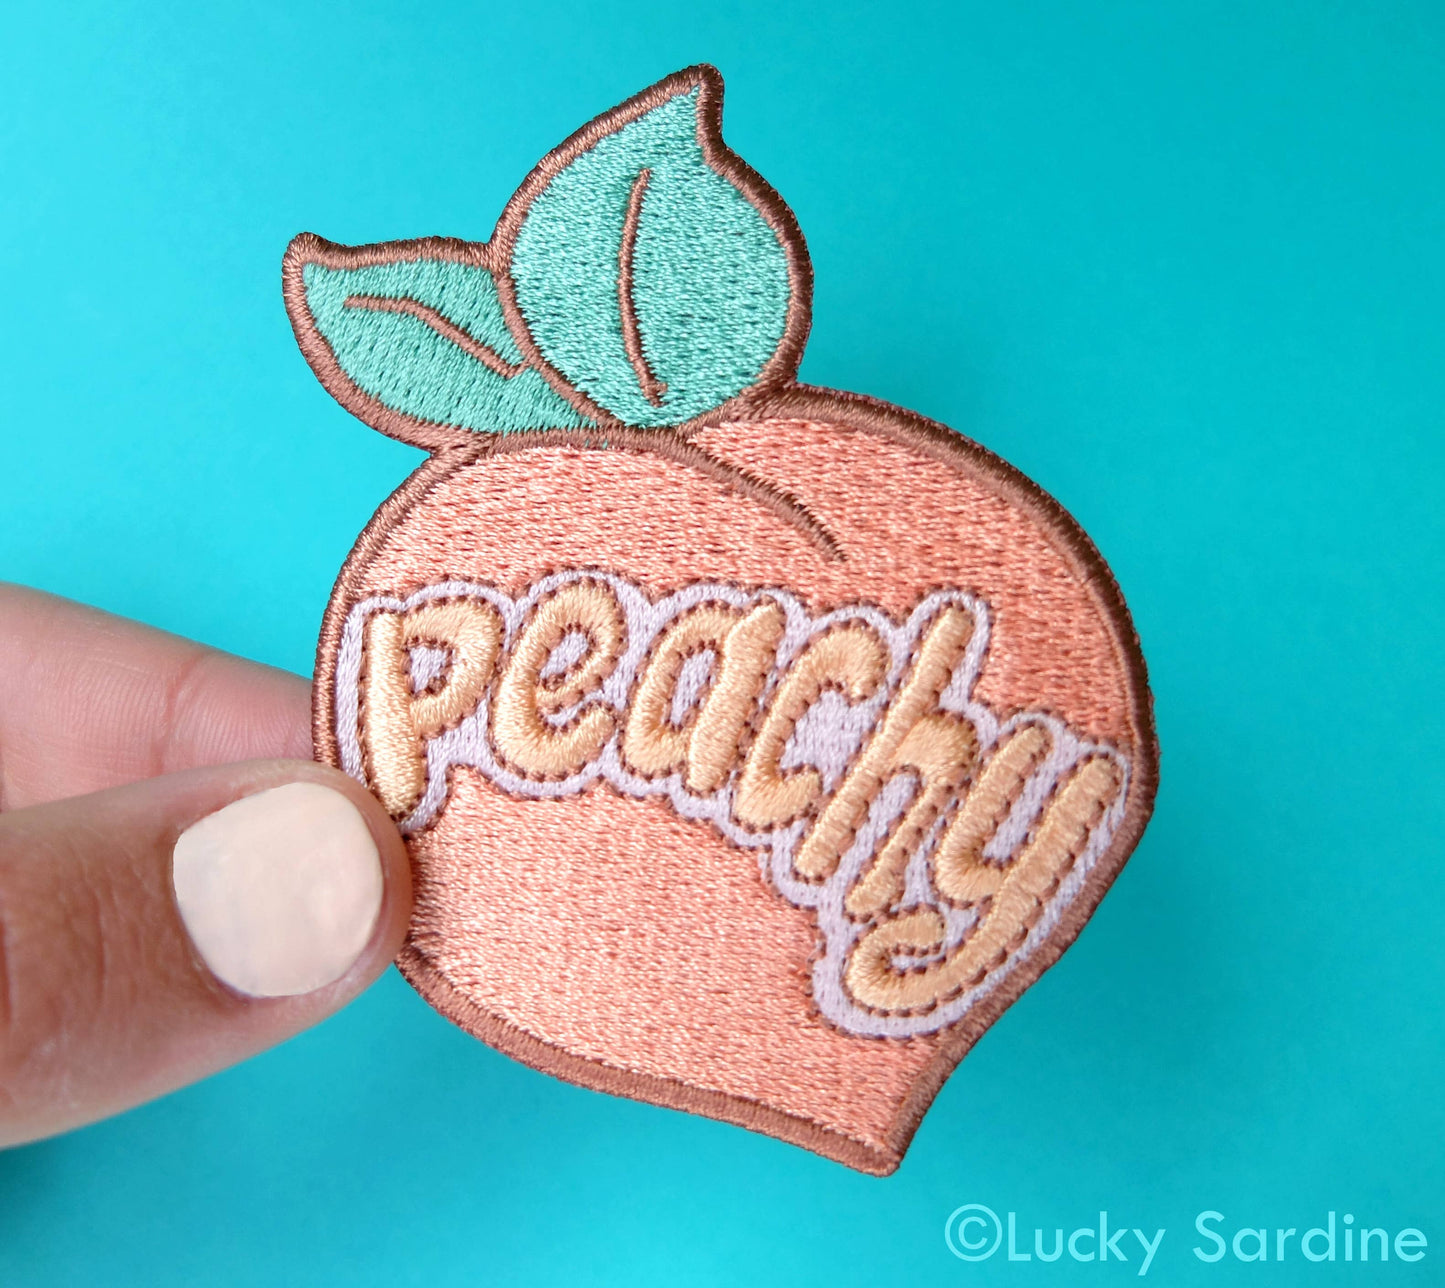 Peachy Embroidered Patch